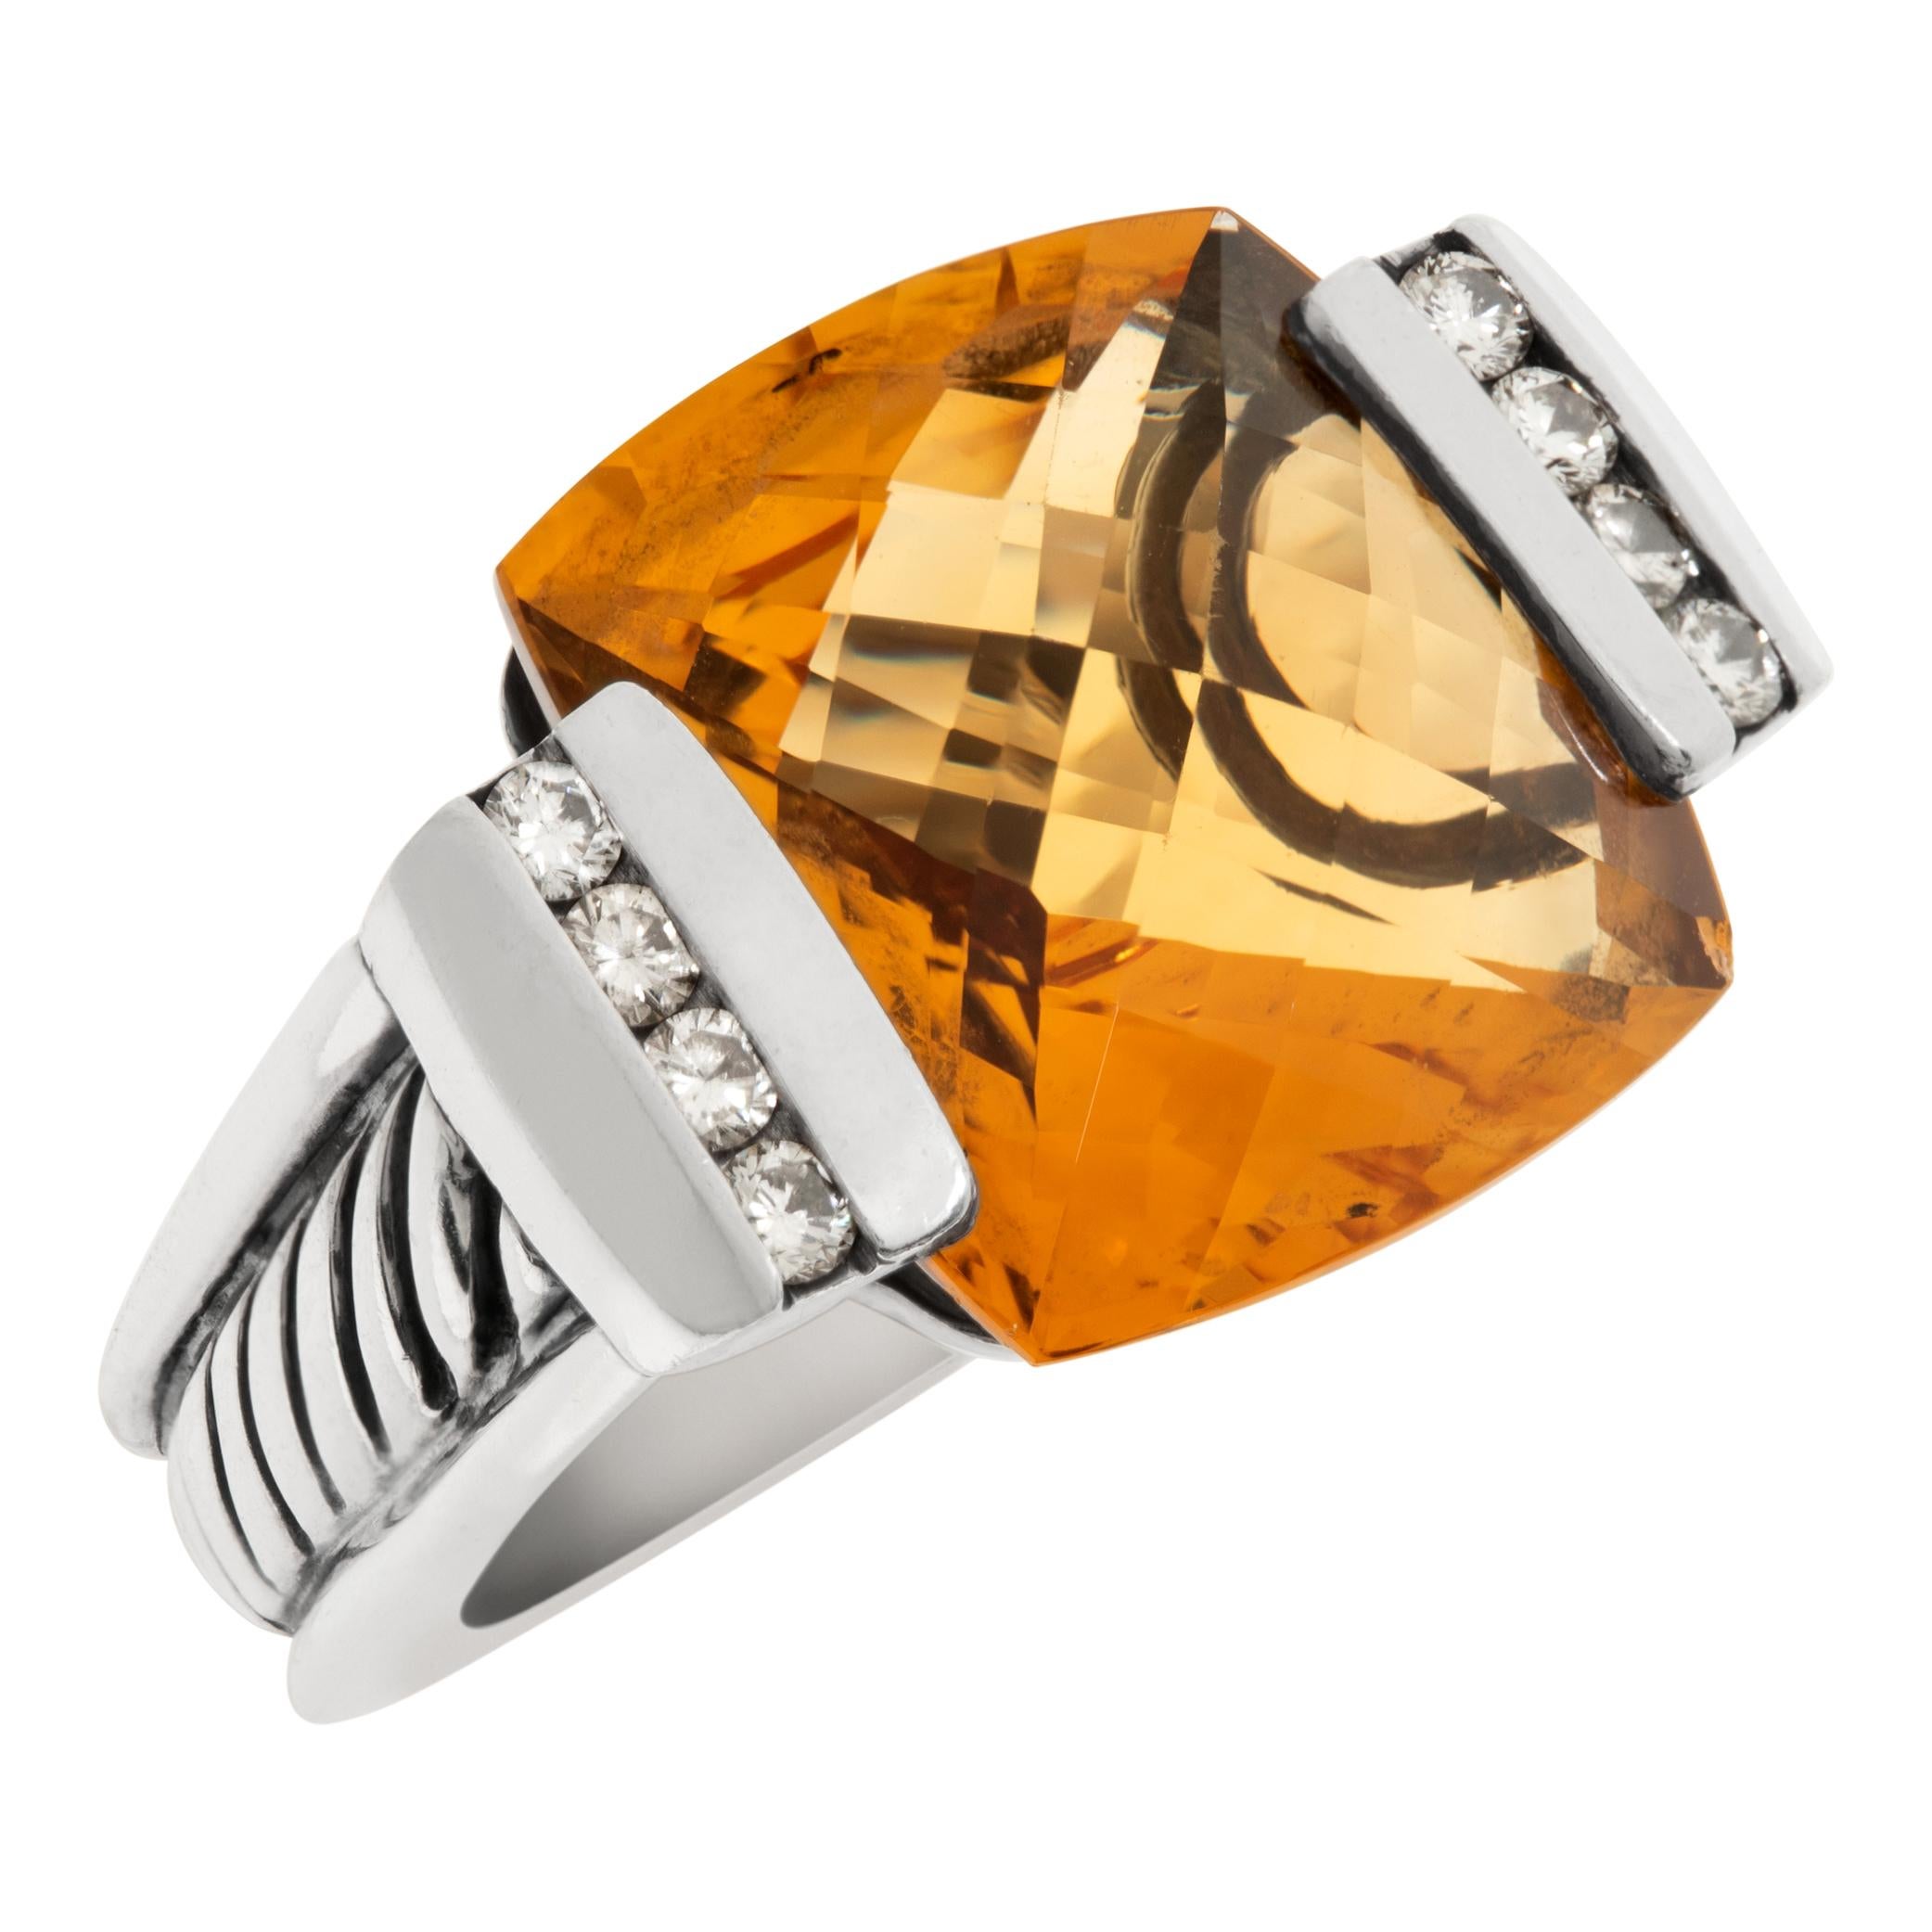 David Yurman Deco citrine & diamond sterling silver ring In Excellent Condition For Sale In Surfside, FL